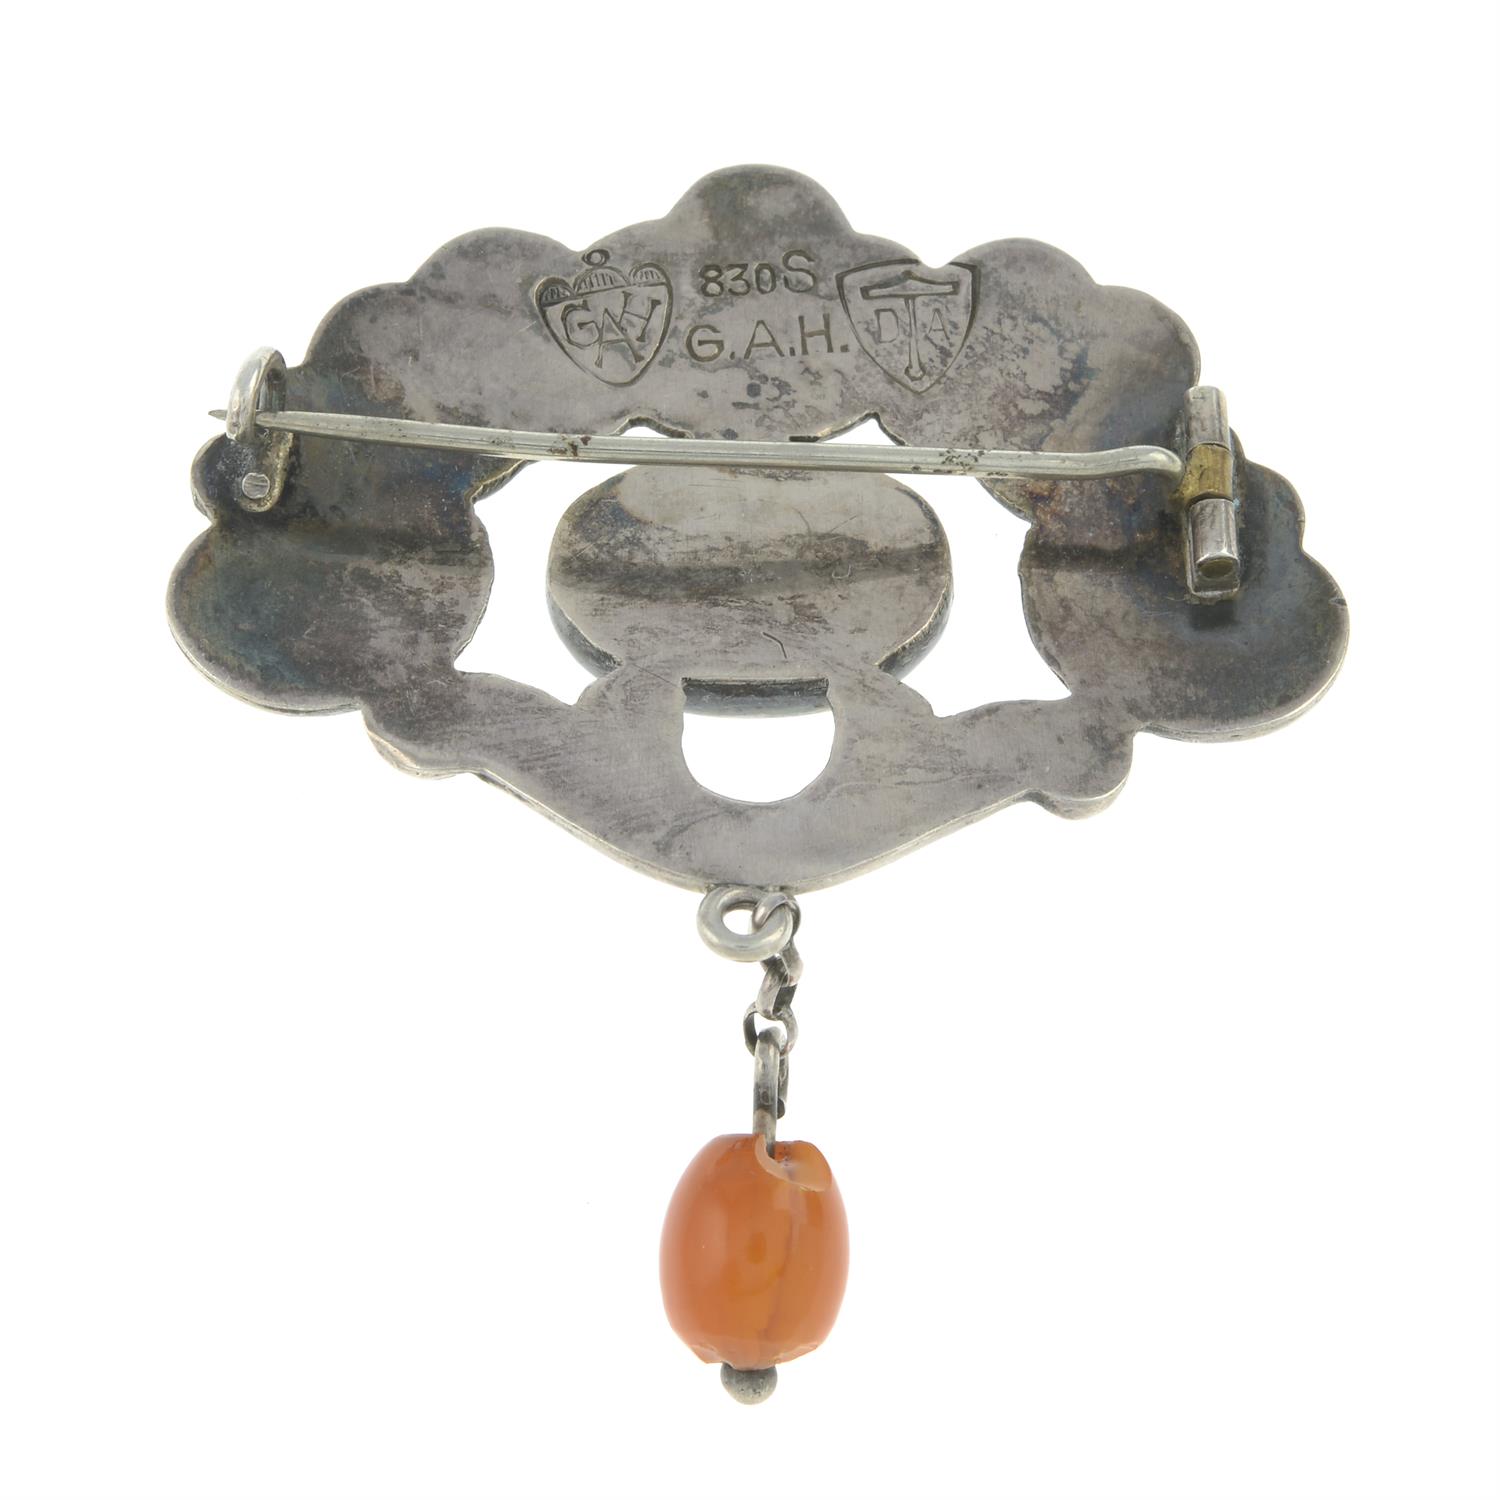 Late 19th century amber brooch, by Georg Albert Halling - Image 2 of 2